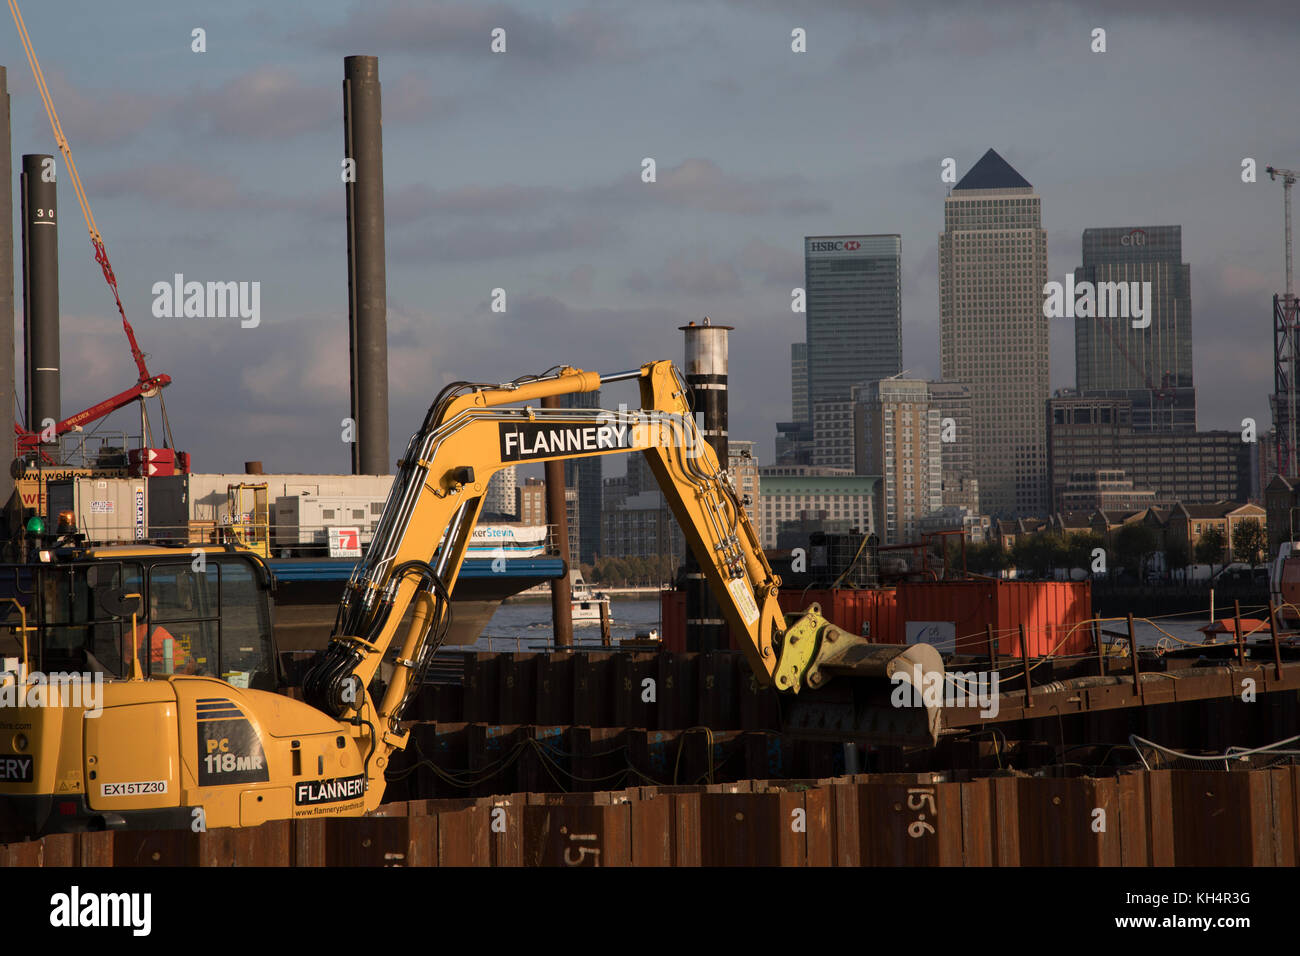 Construction work underway on the Thames Tideway Tunnel or Super Sewer on the River Thames near Wapping, with JCB diggers working in the foreground with Canary Wharf and the Docklands Financial District as the background in London, England, United Kingdom. The Thames Tideway Tunnel is an under-construction civil engineering project 25 km tunnel running mostly under the tidal section of the River Thames through central London, which will provide capture, storage and conveyance of almost all the combined raw sewage and rainwater discharges that currently overflow into the river. Stock Photo